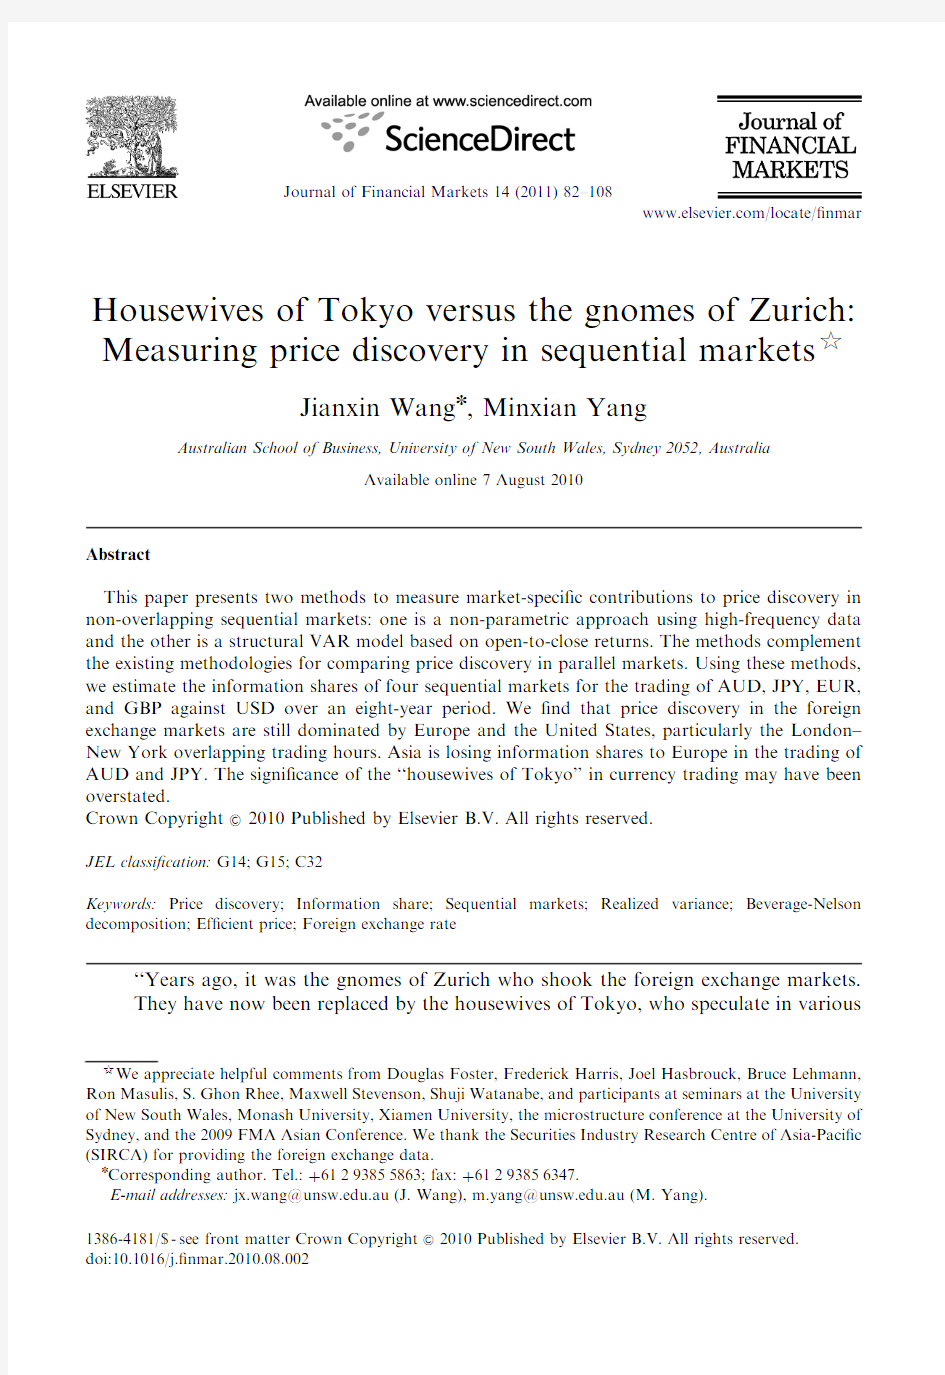 Housewives of Tokyo versus the gnomes of Zurich_ Measuring price discovery in sequential markets